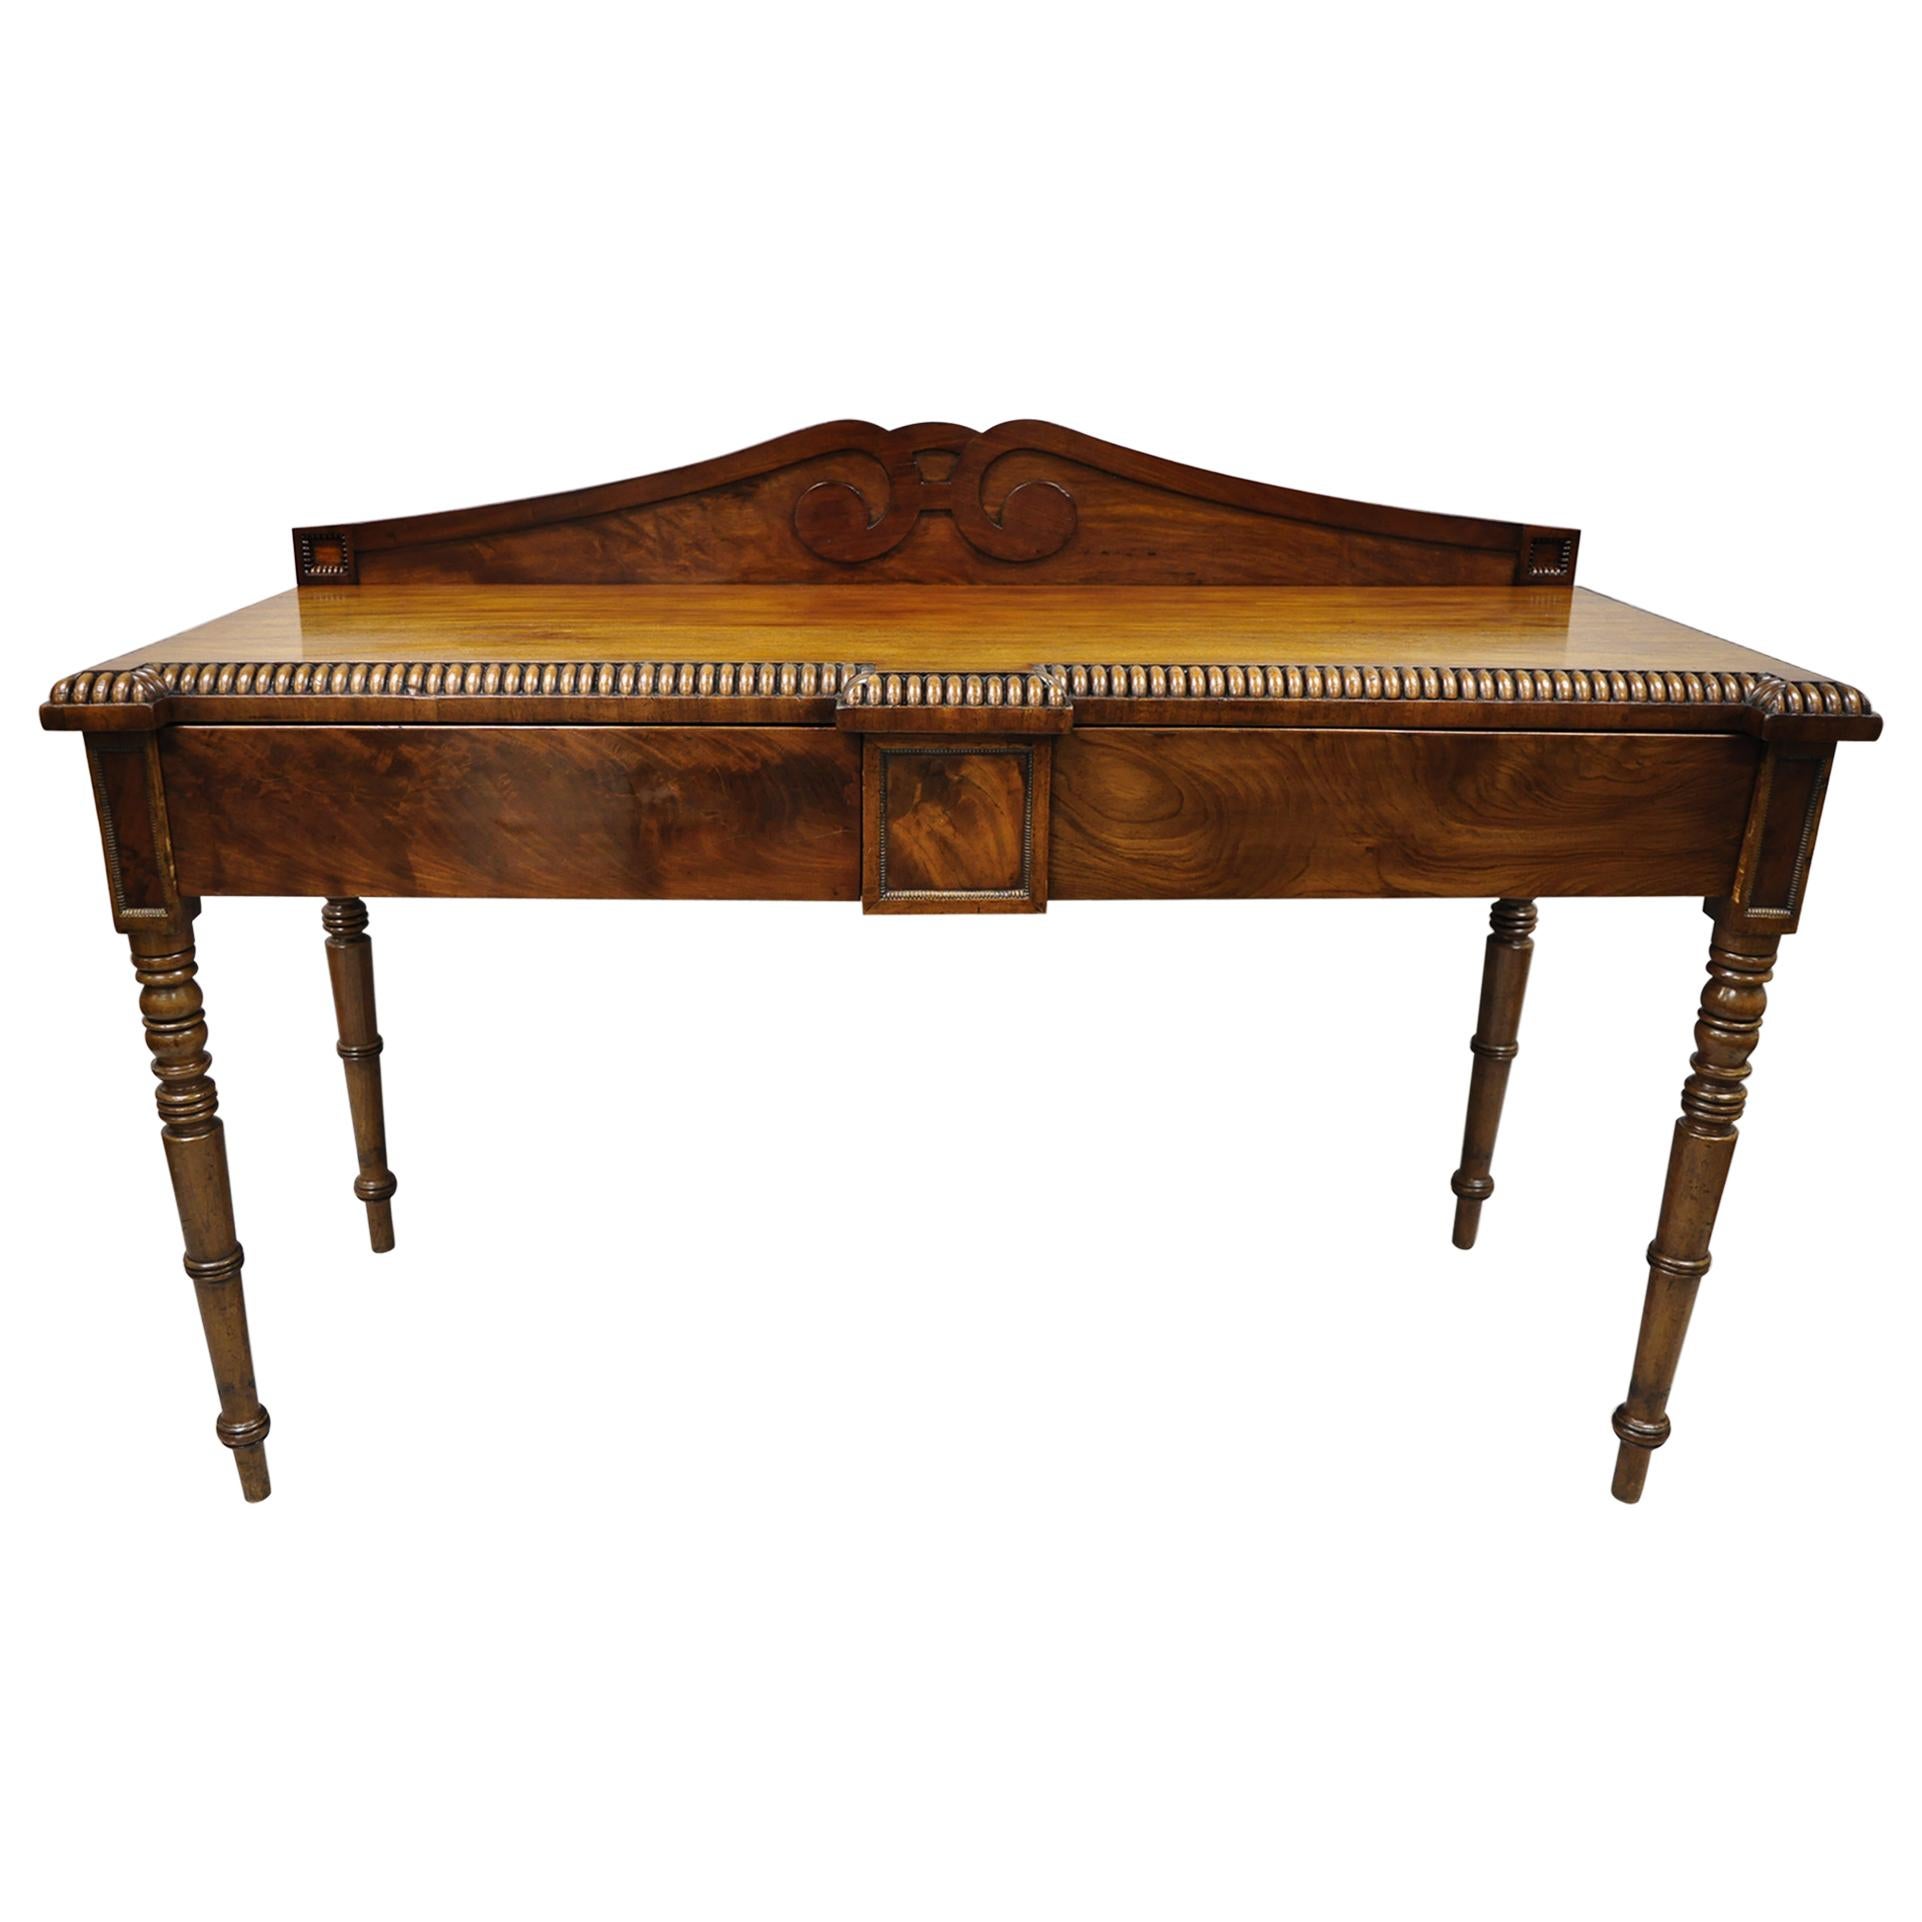 Antique English Regency Crotch Mahogany Rope Carved Sideboard Console Table For Sale